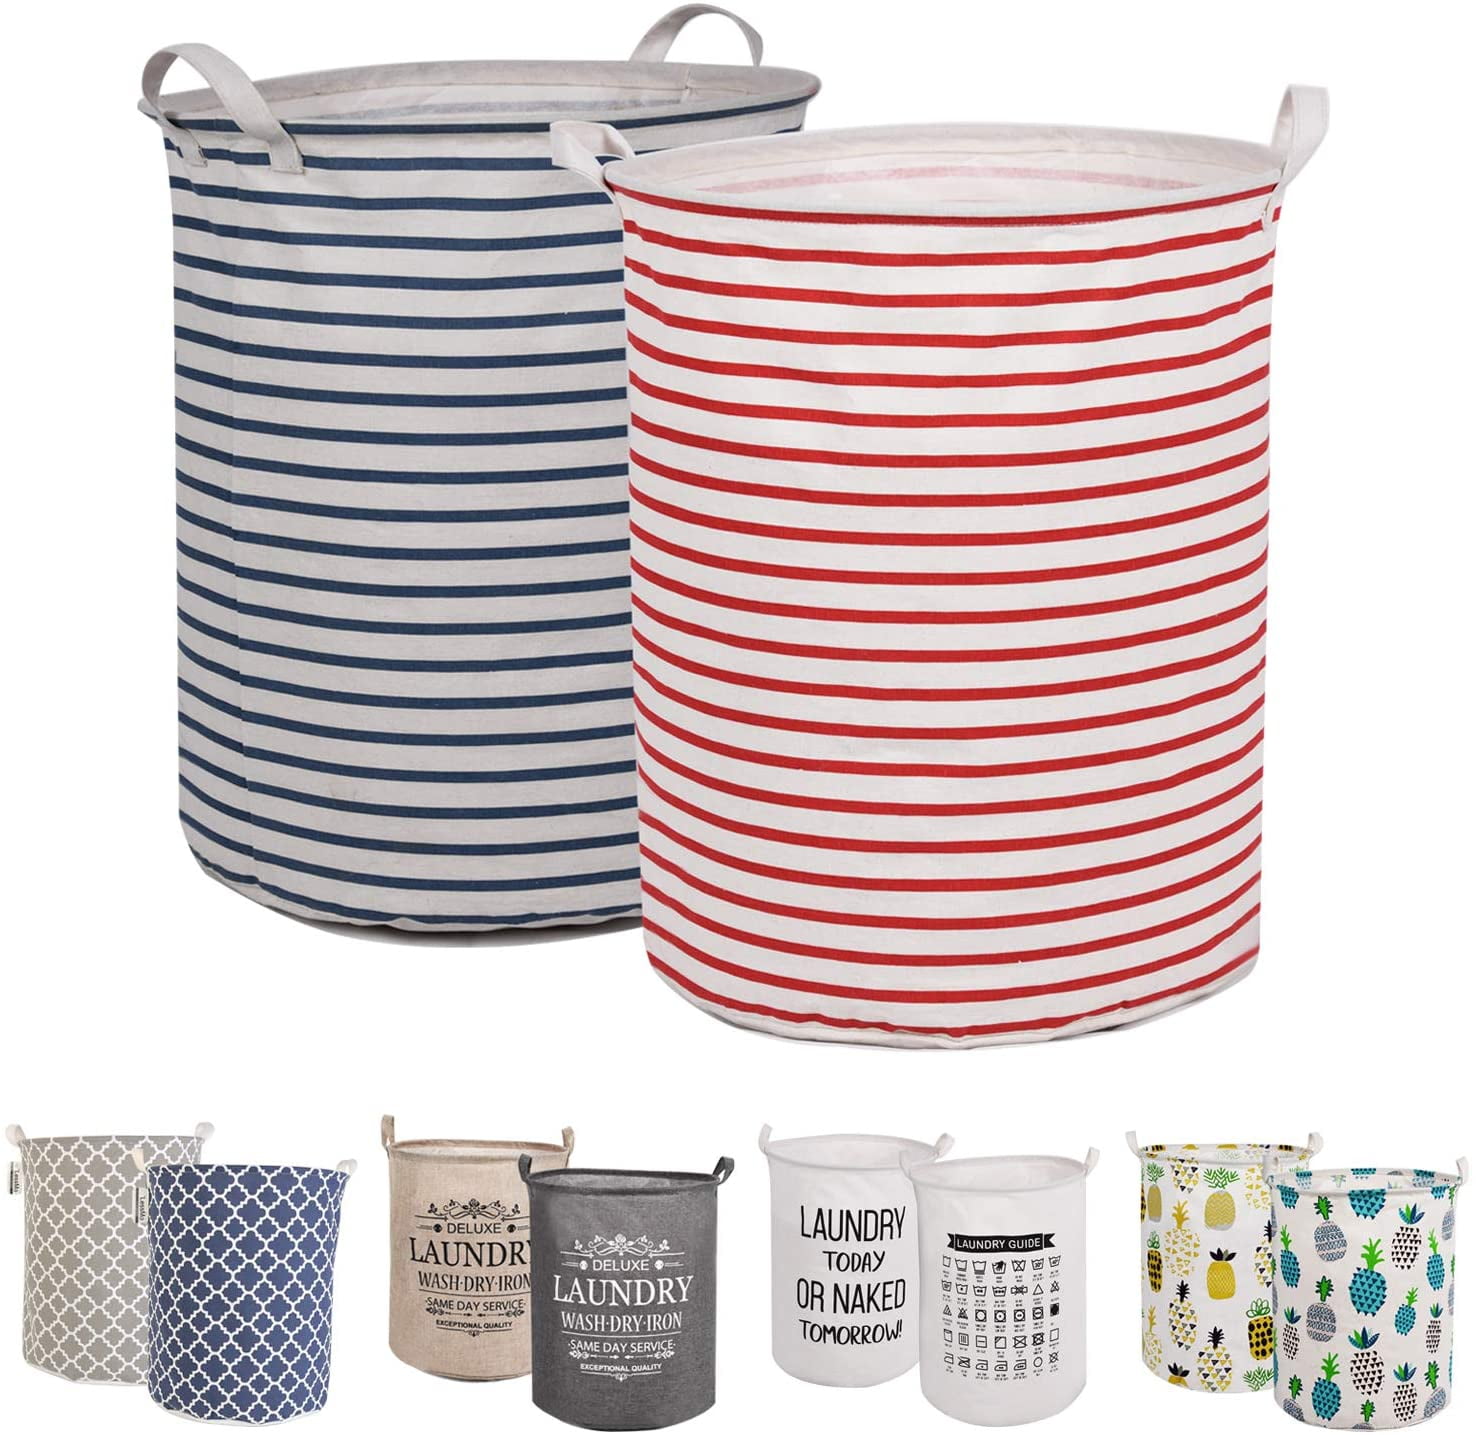 Bathrooms Collapsible Pop-Up Laundry Hampers Toys and Dirty Waterproof Round Cotton Linen with Drawstring Cover for Bedroom LessMo 19.7 Laundry Basket Storage Sorter 